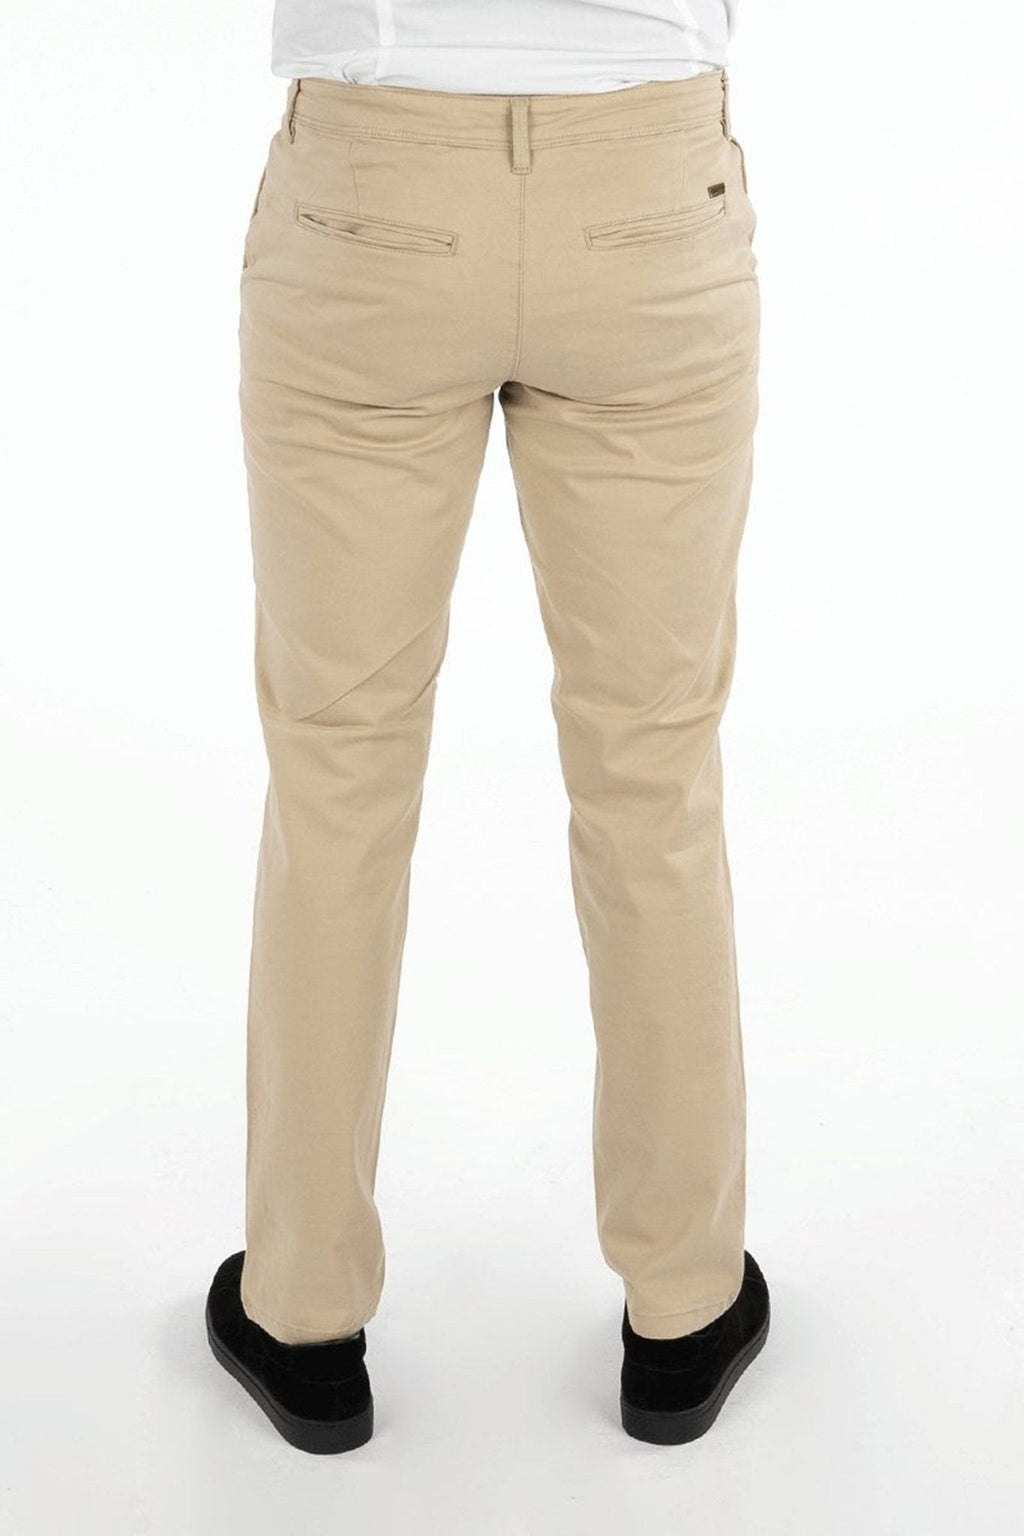 Marco Bowie Chino Pants - Light sand